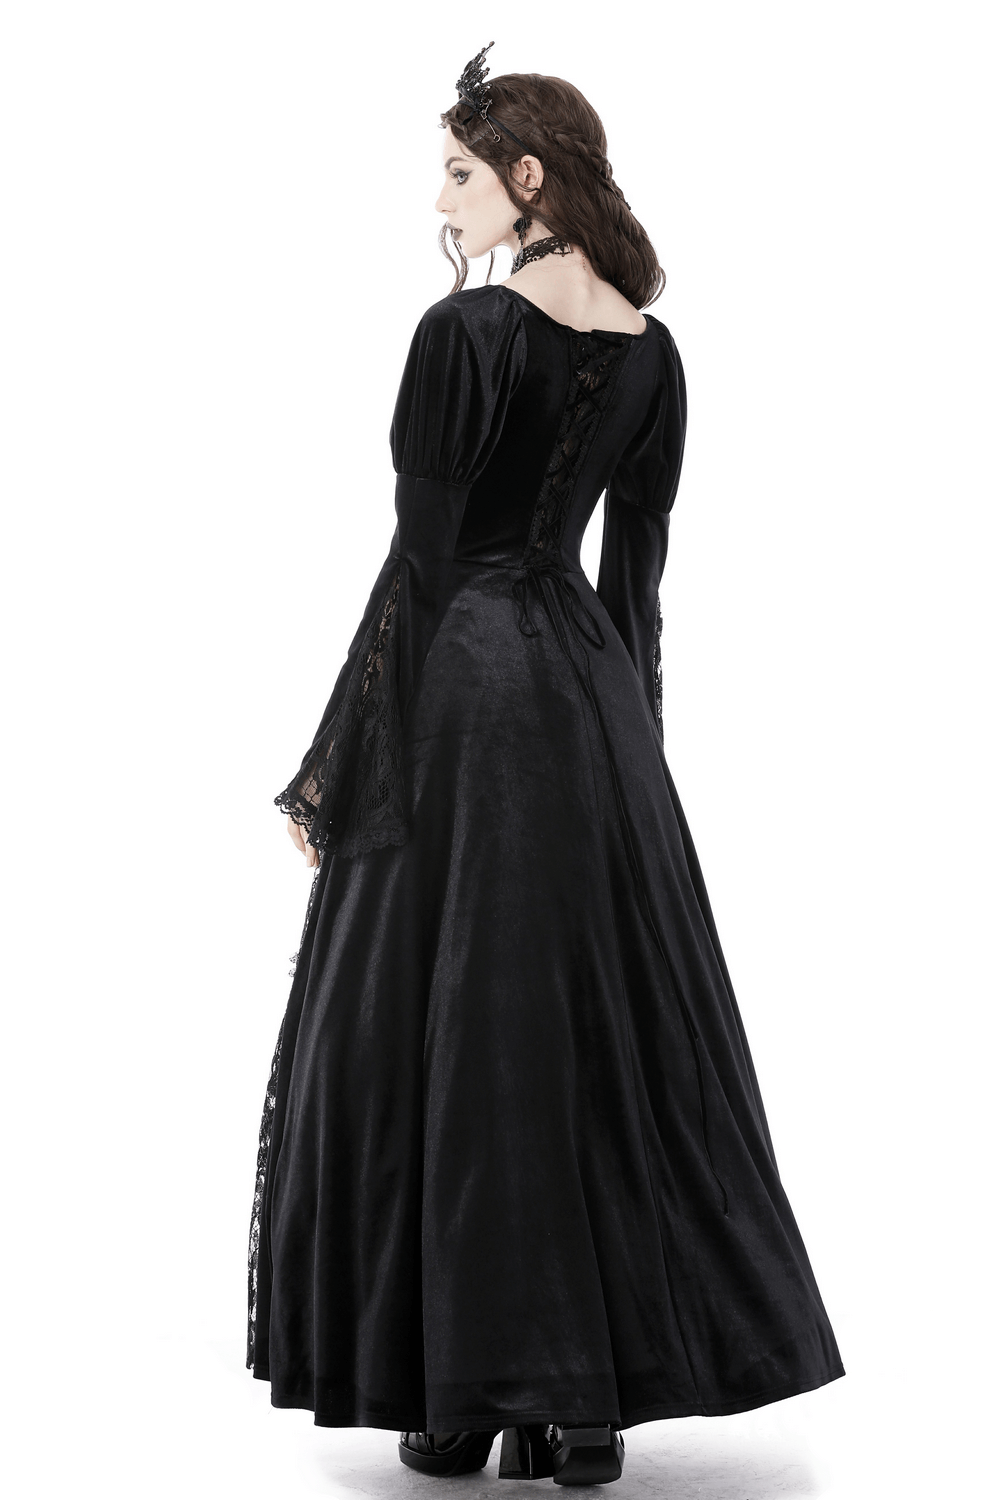 Elegant Black Lace Victorian Gown for Evening Events